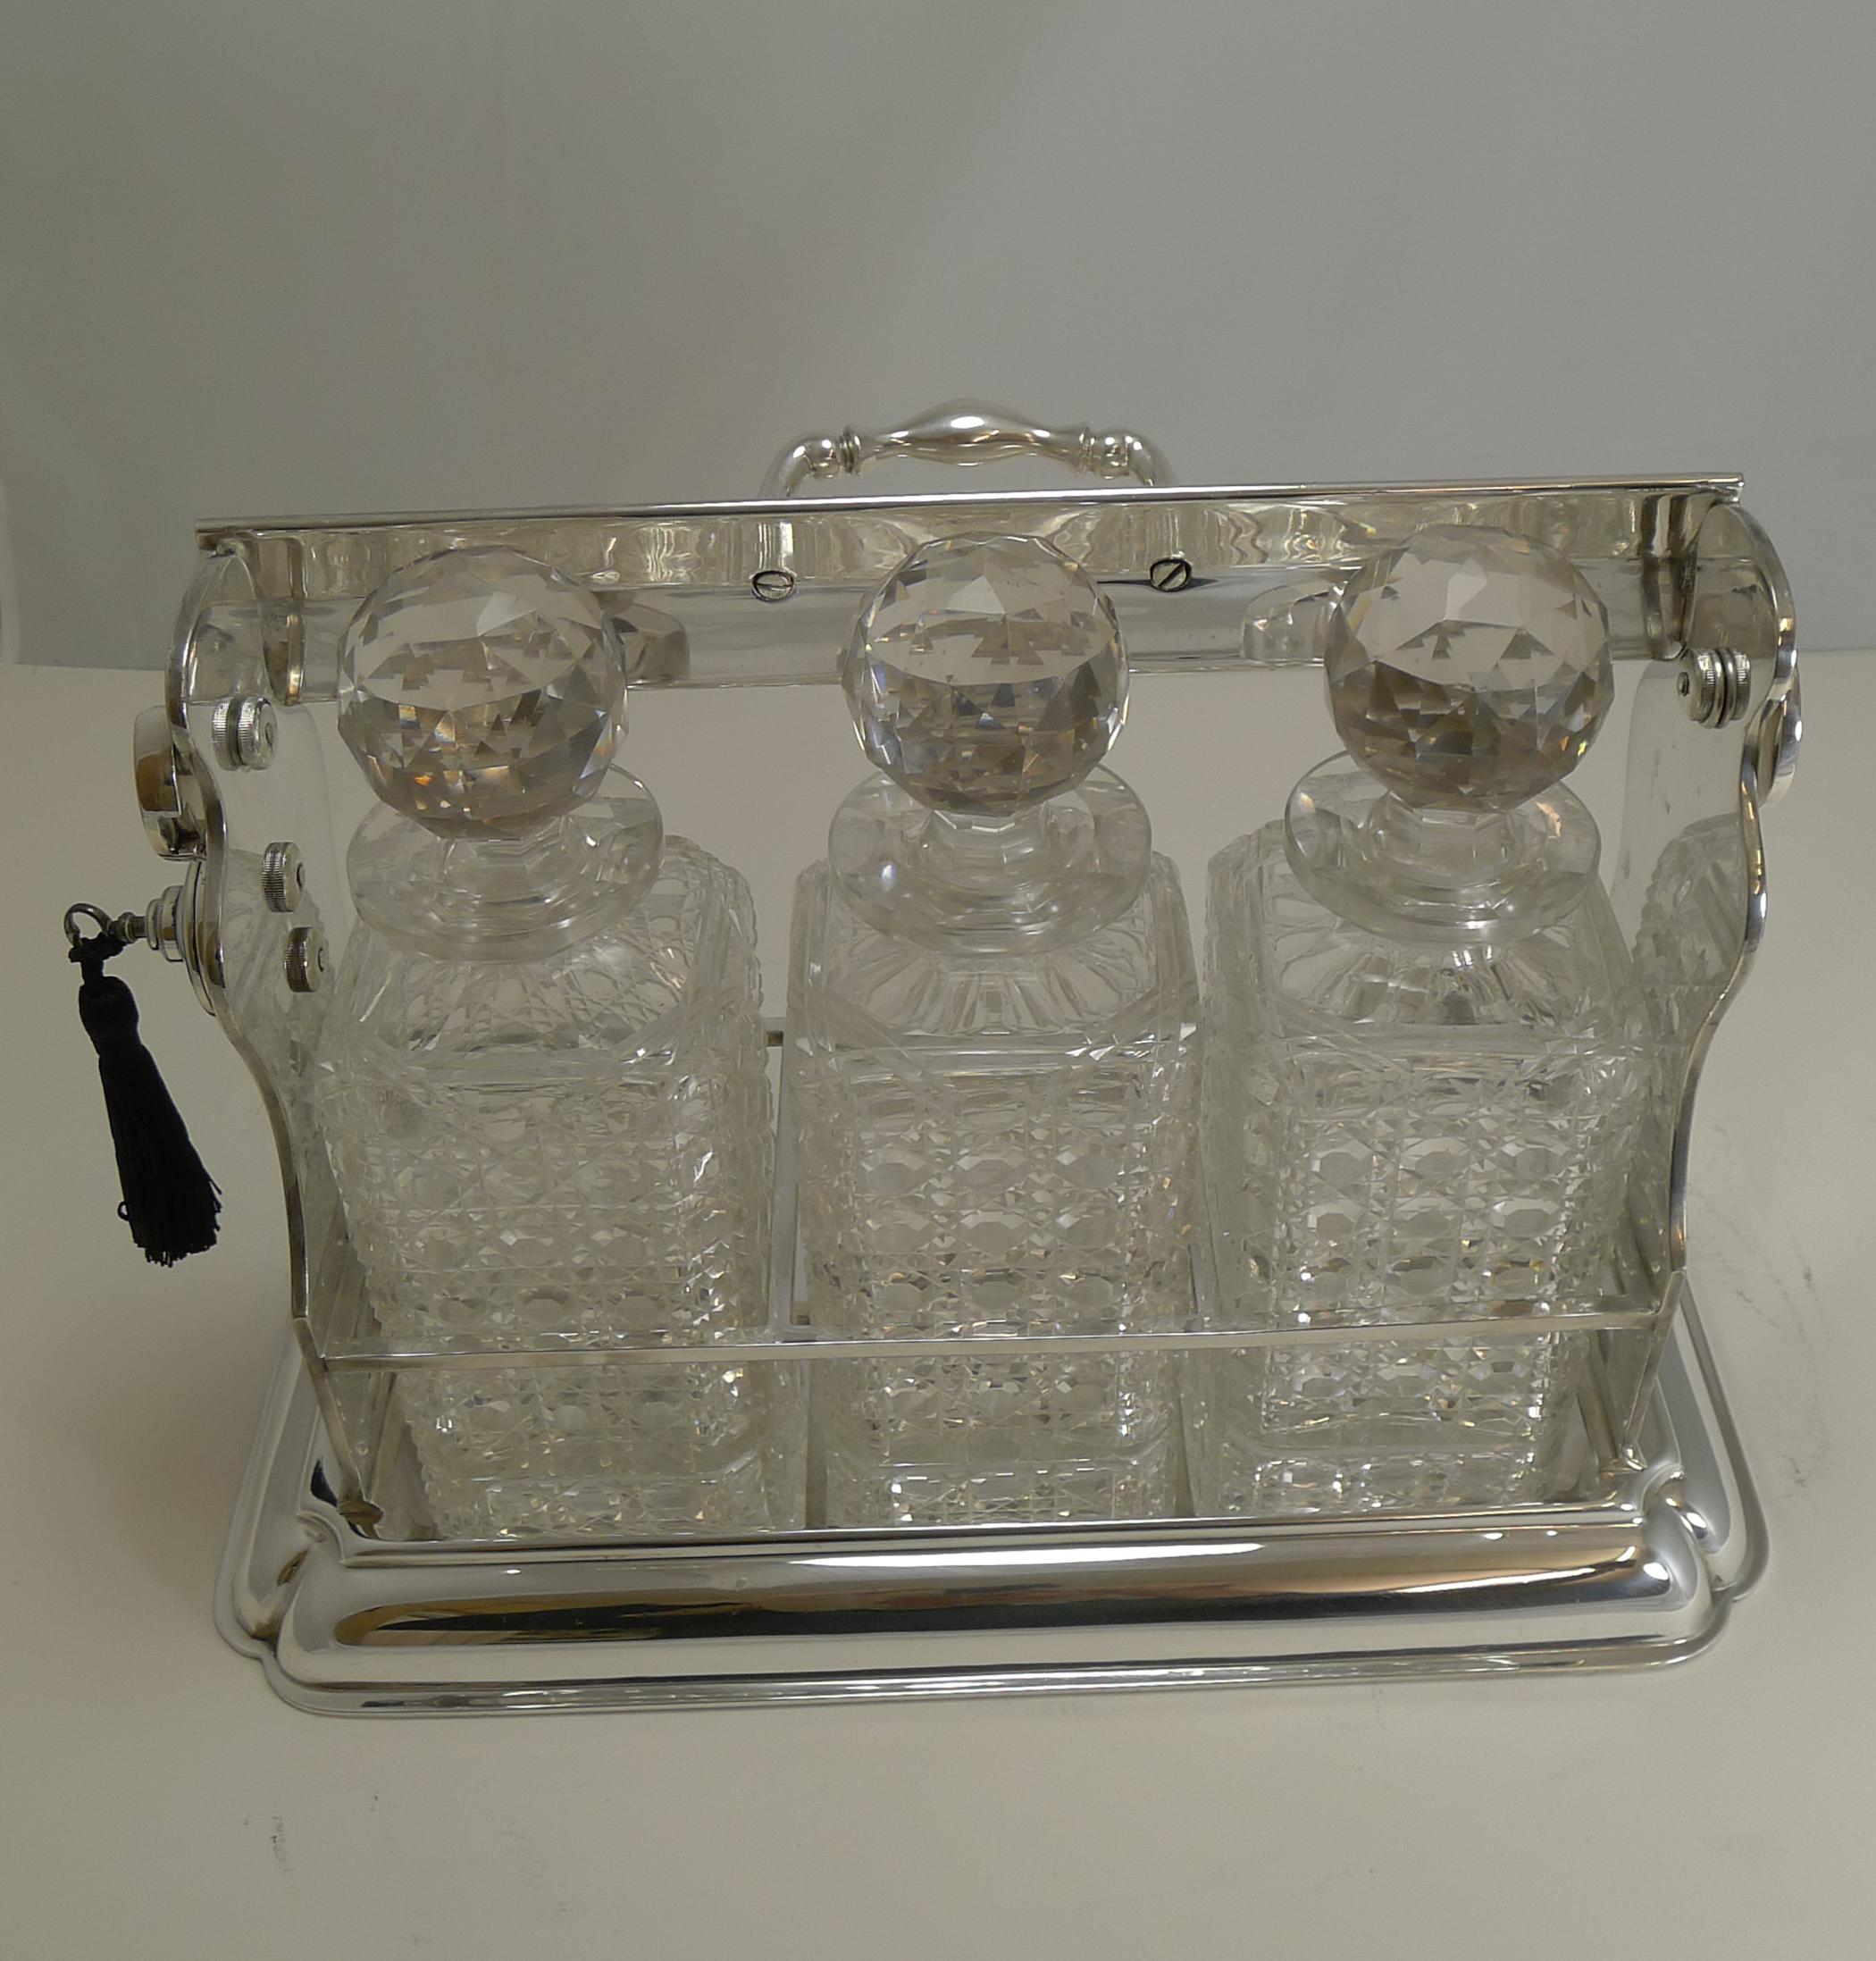 A handsome large example of a silver plated Tantalus made by the top-notch London silversmith, Mappin and Webb and dating to circa 1900.

The case comes with a working Bramah key, this is sprung and requires a slight push in and then turn. The